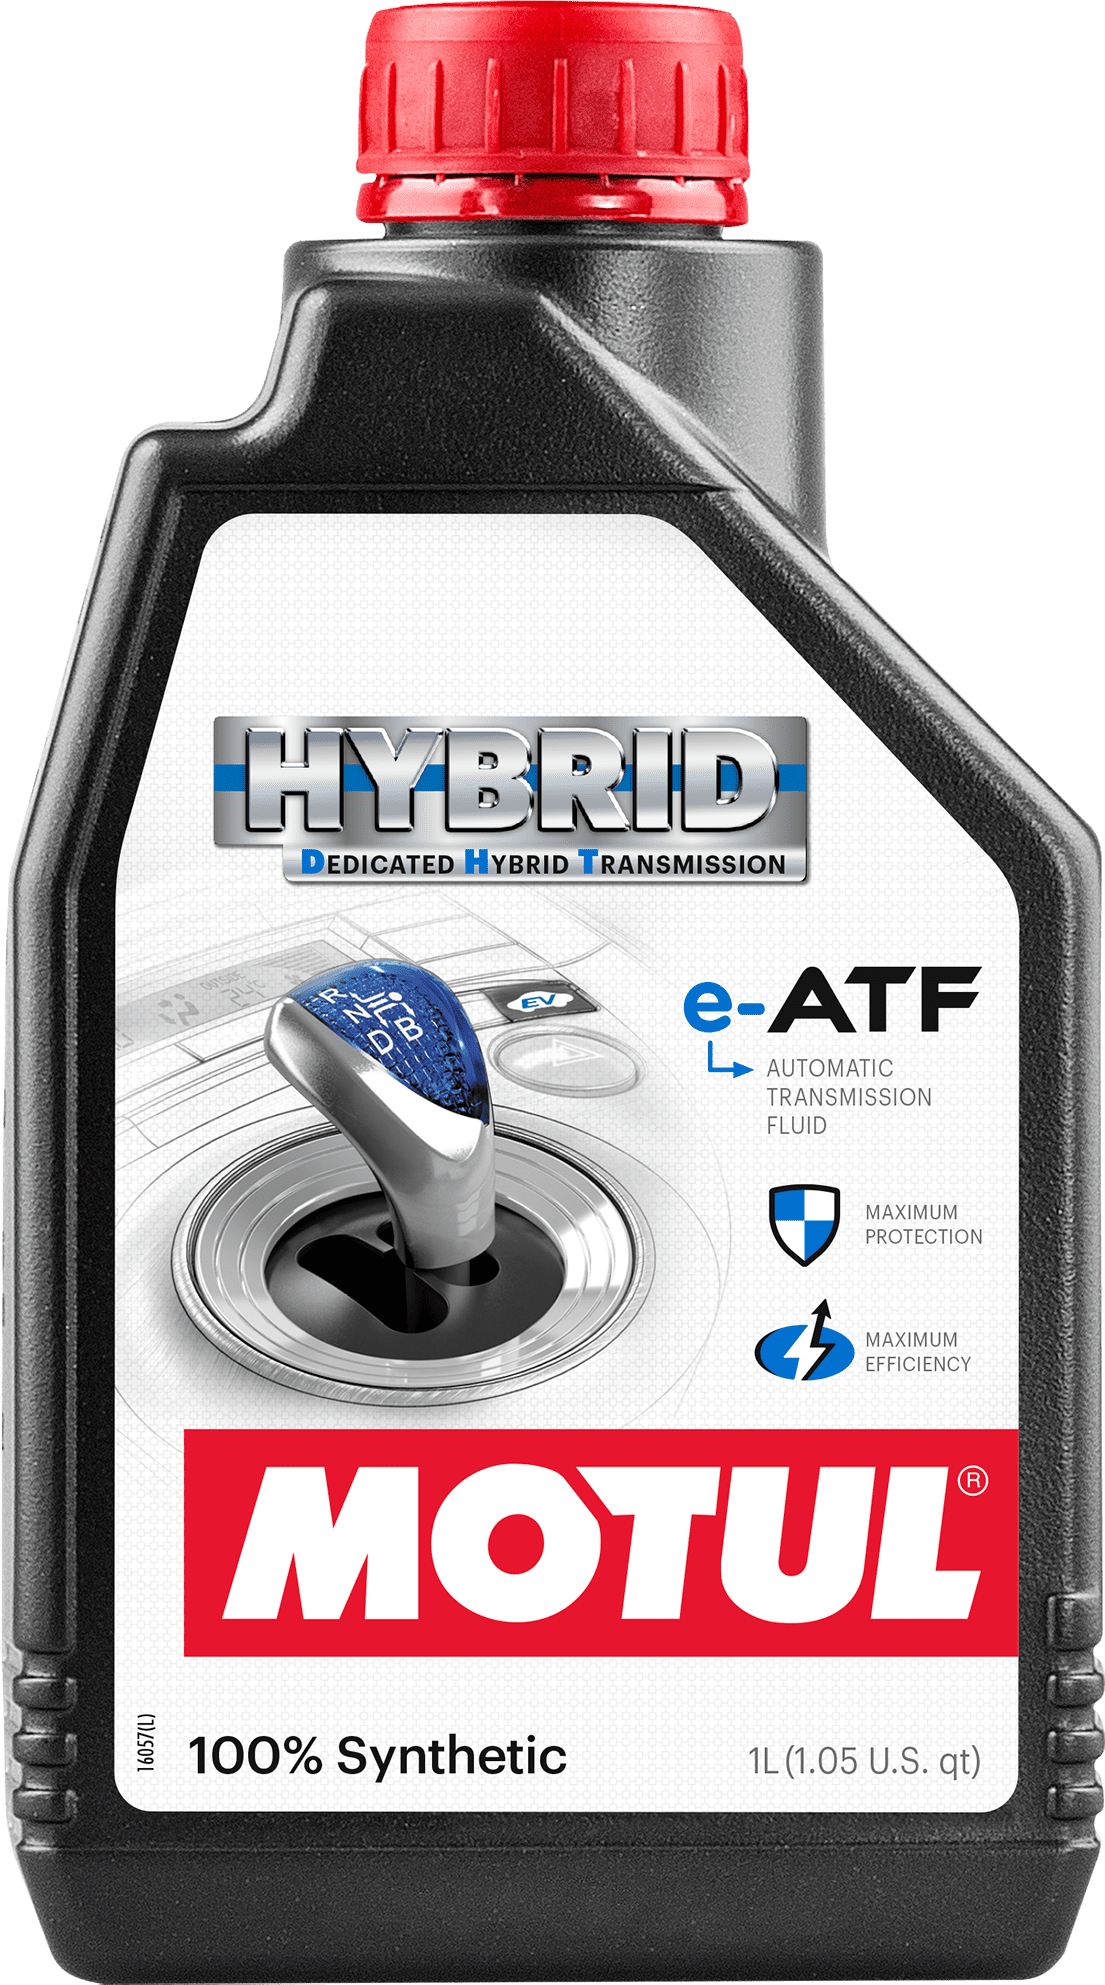 109562-1 100% Synthetic transmission fluid dedicated for hybrid and plug-in hybrid vehicles.